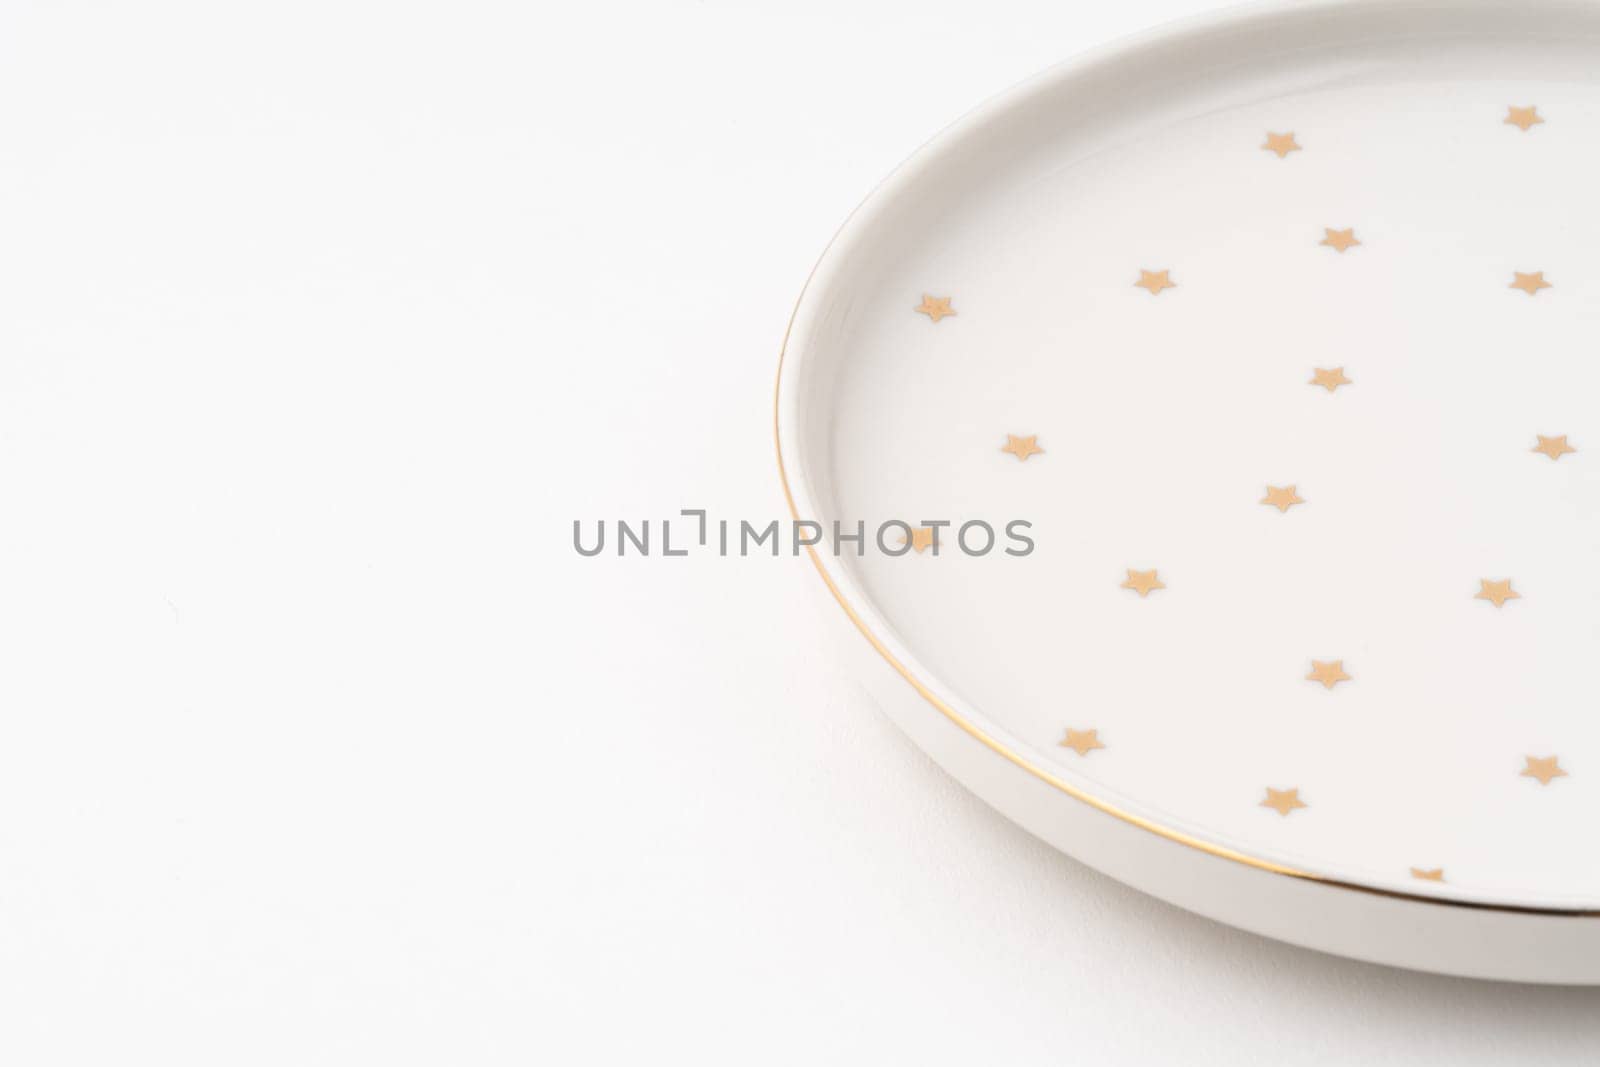 The one ceramic plate isolated on white background by A_Karim